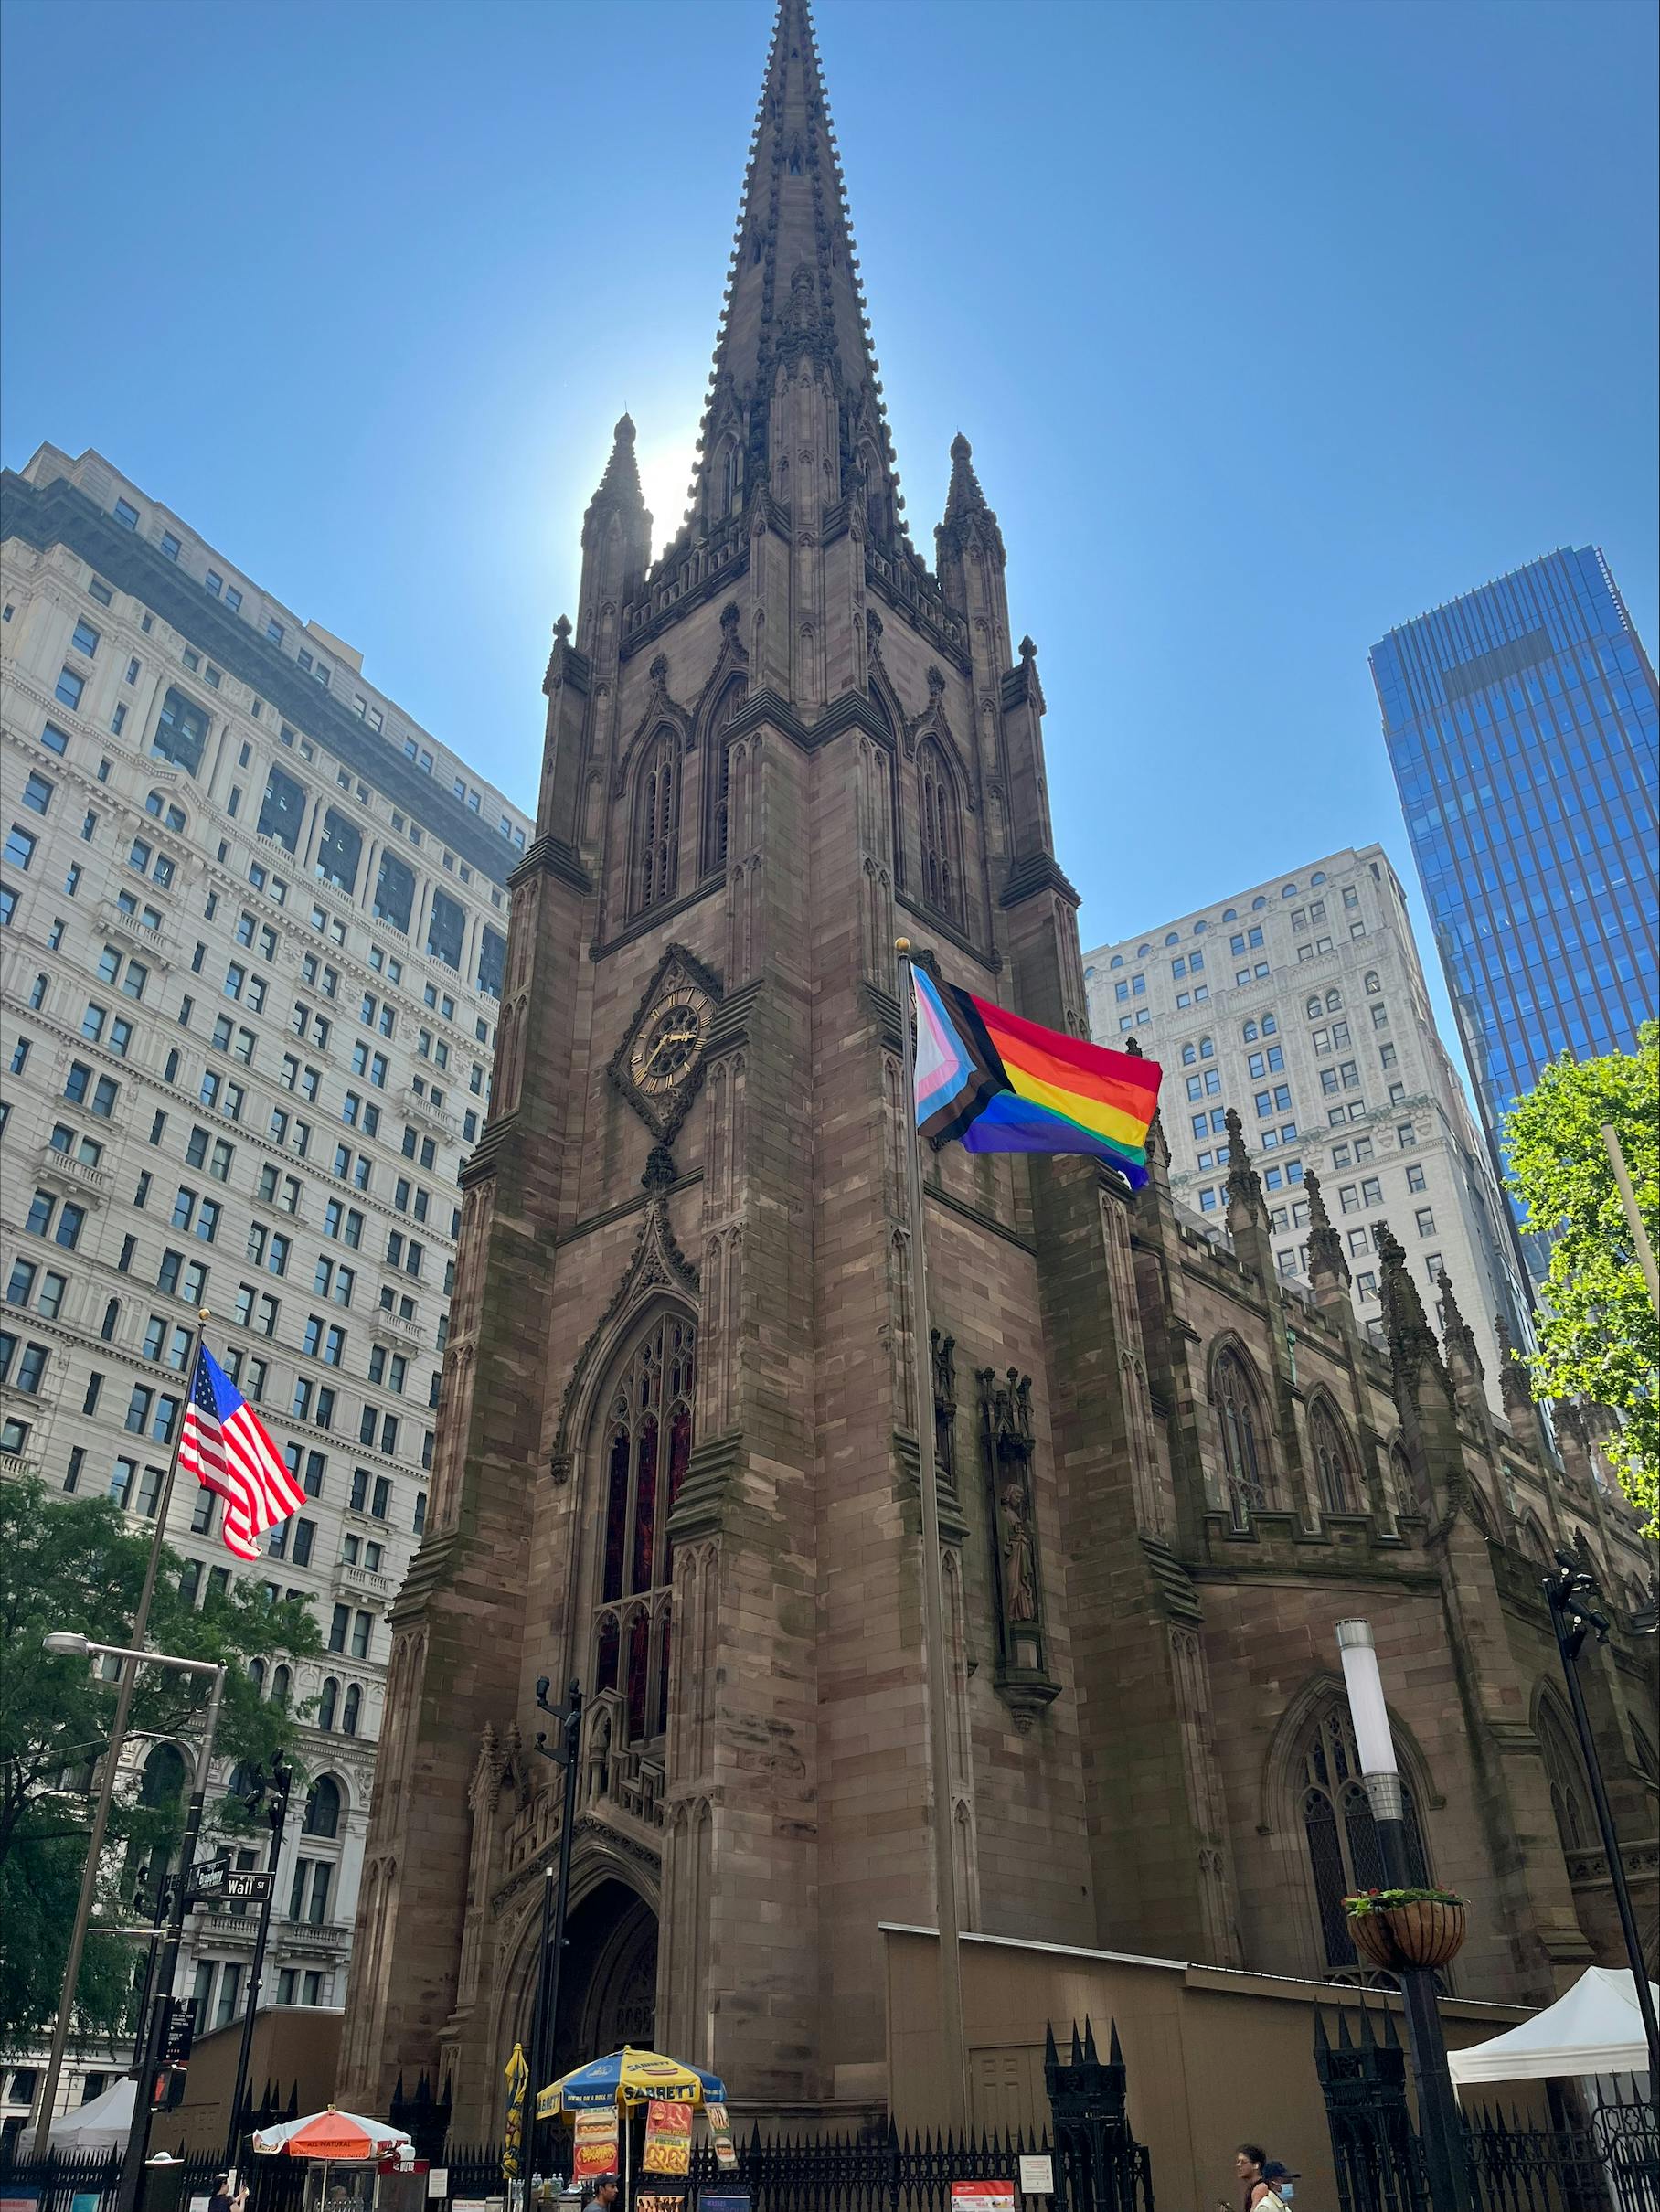 Image of Pride Flag in front of Trinity Church